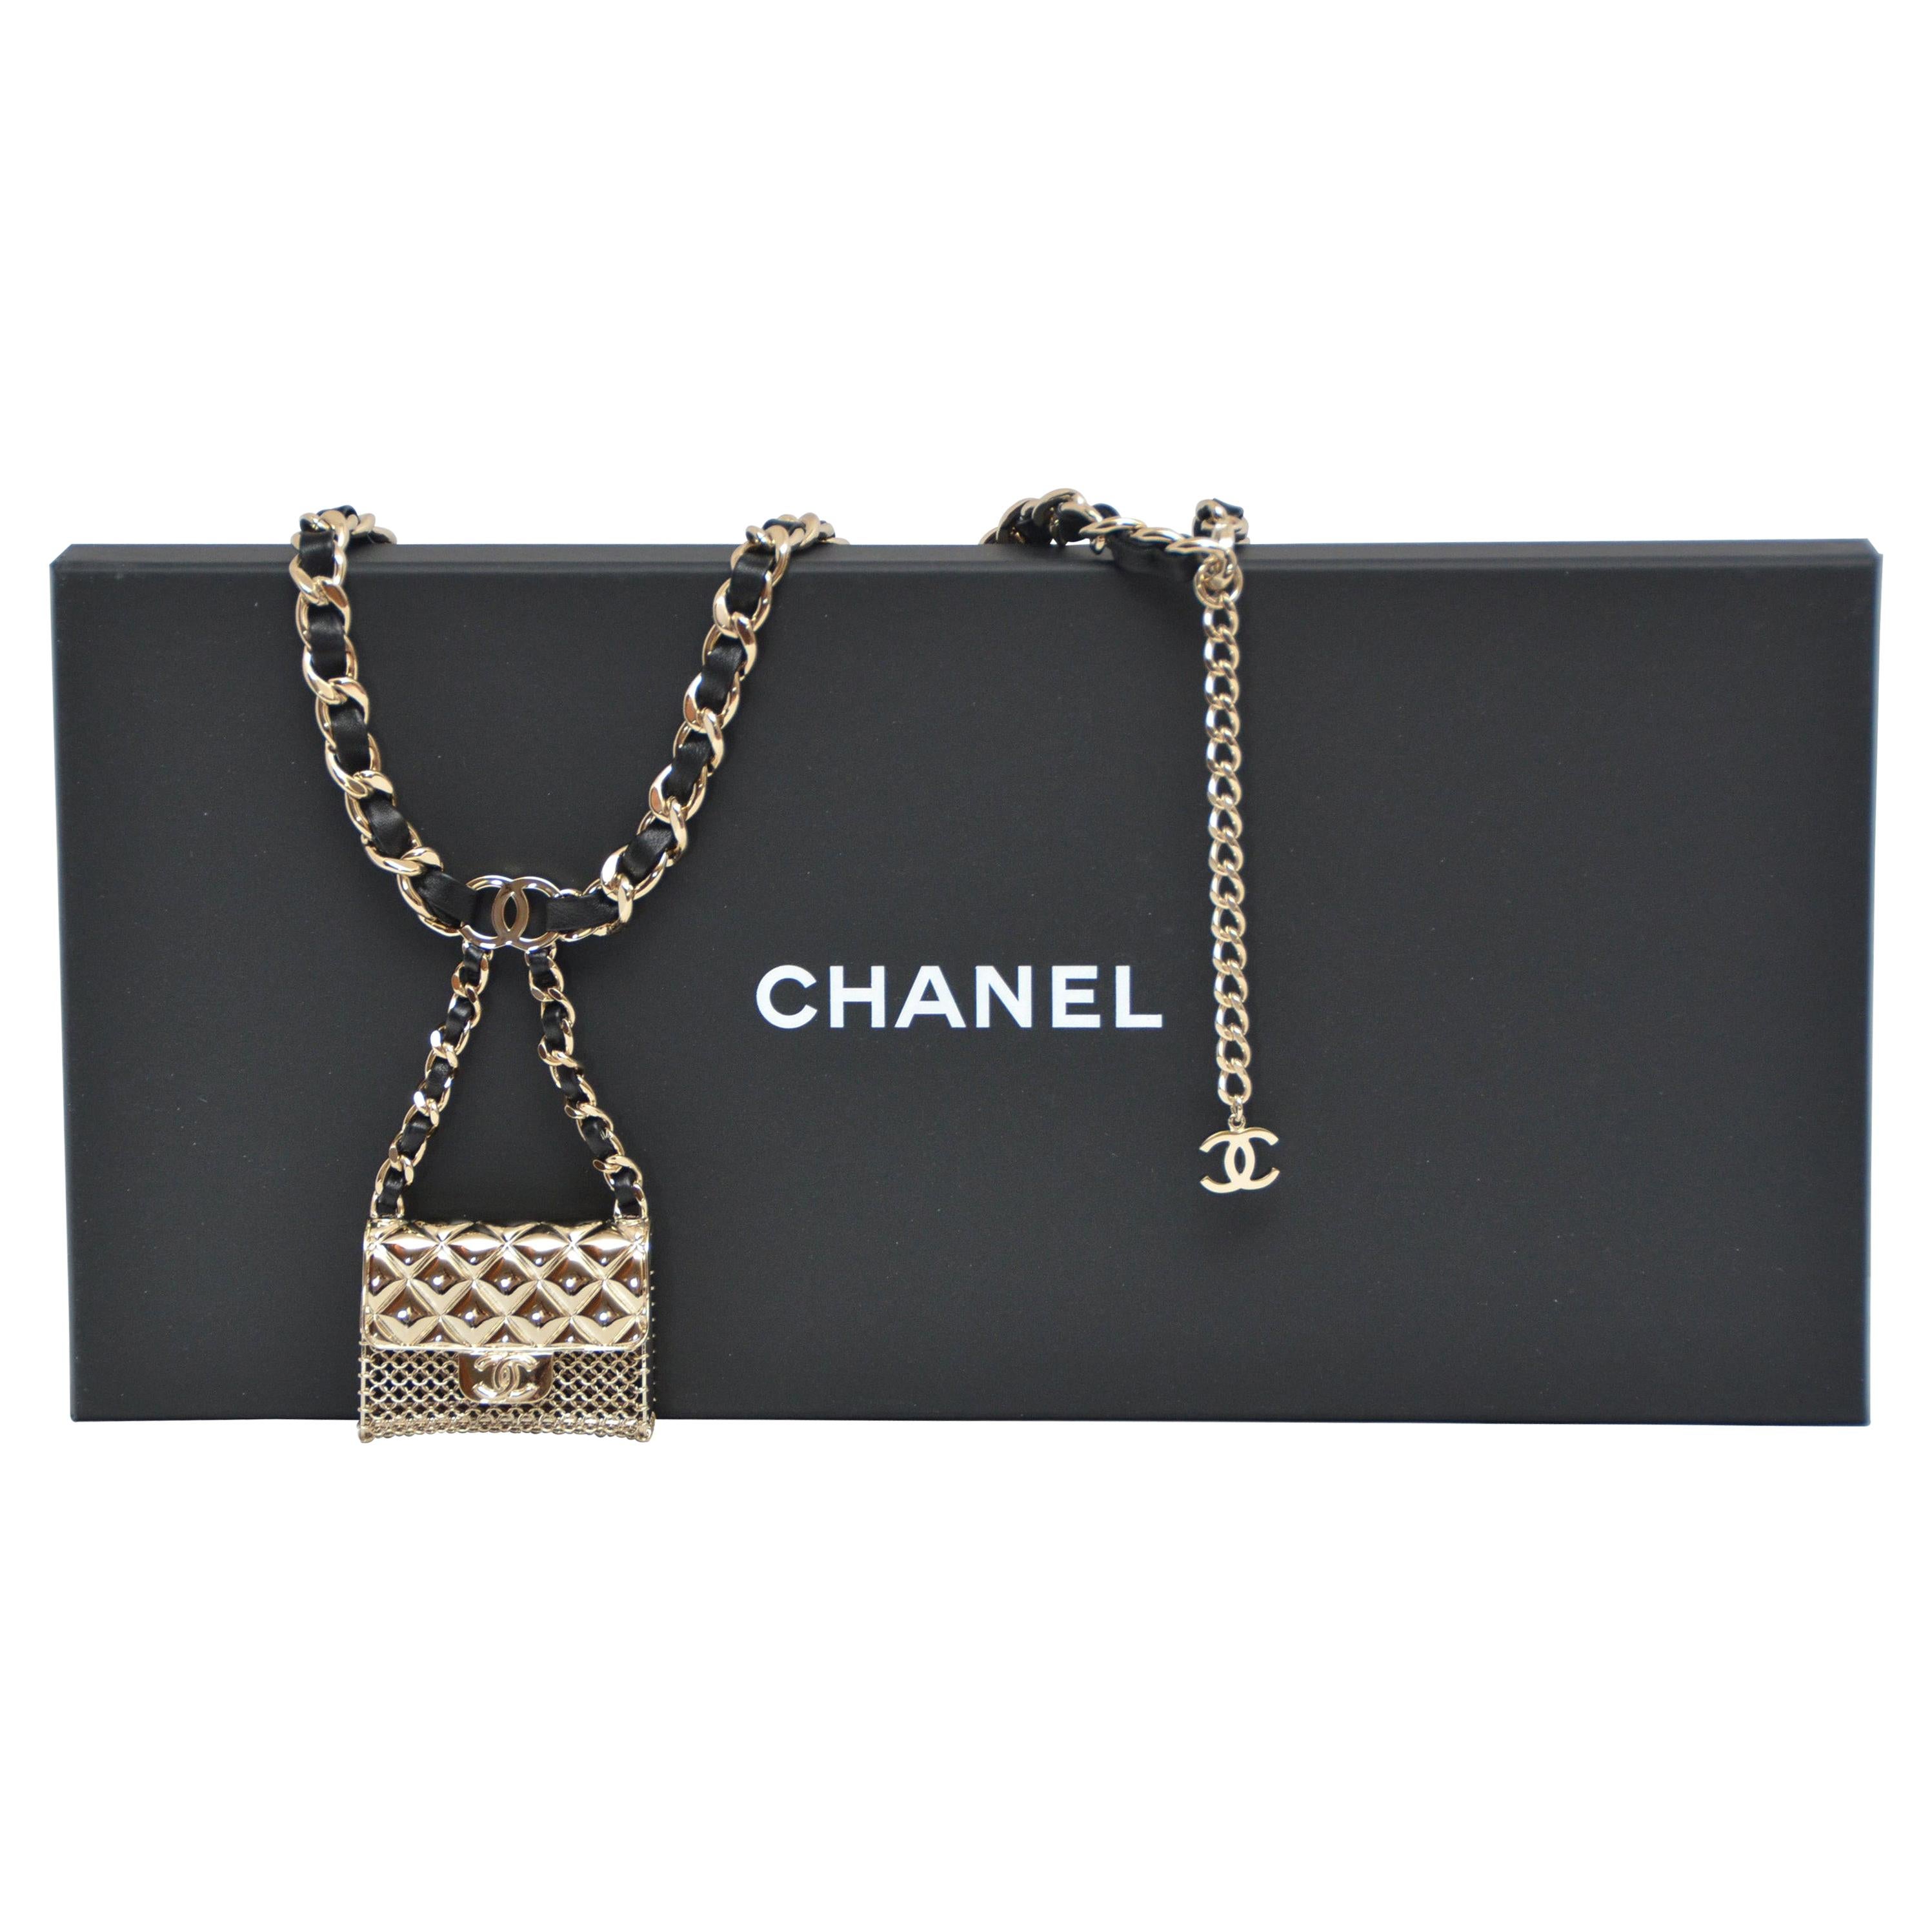 CHANEL Lambskin Quilted All About Chains Waist Belt Bag Black 384395   FASHIONPHILE